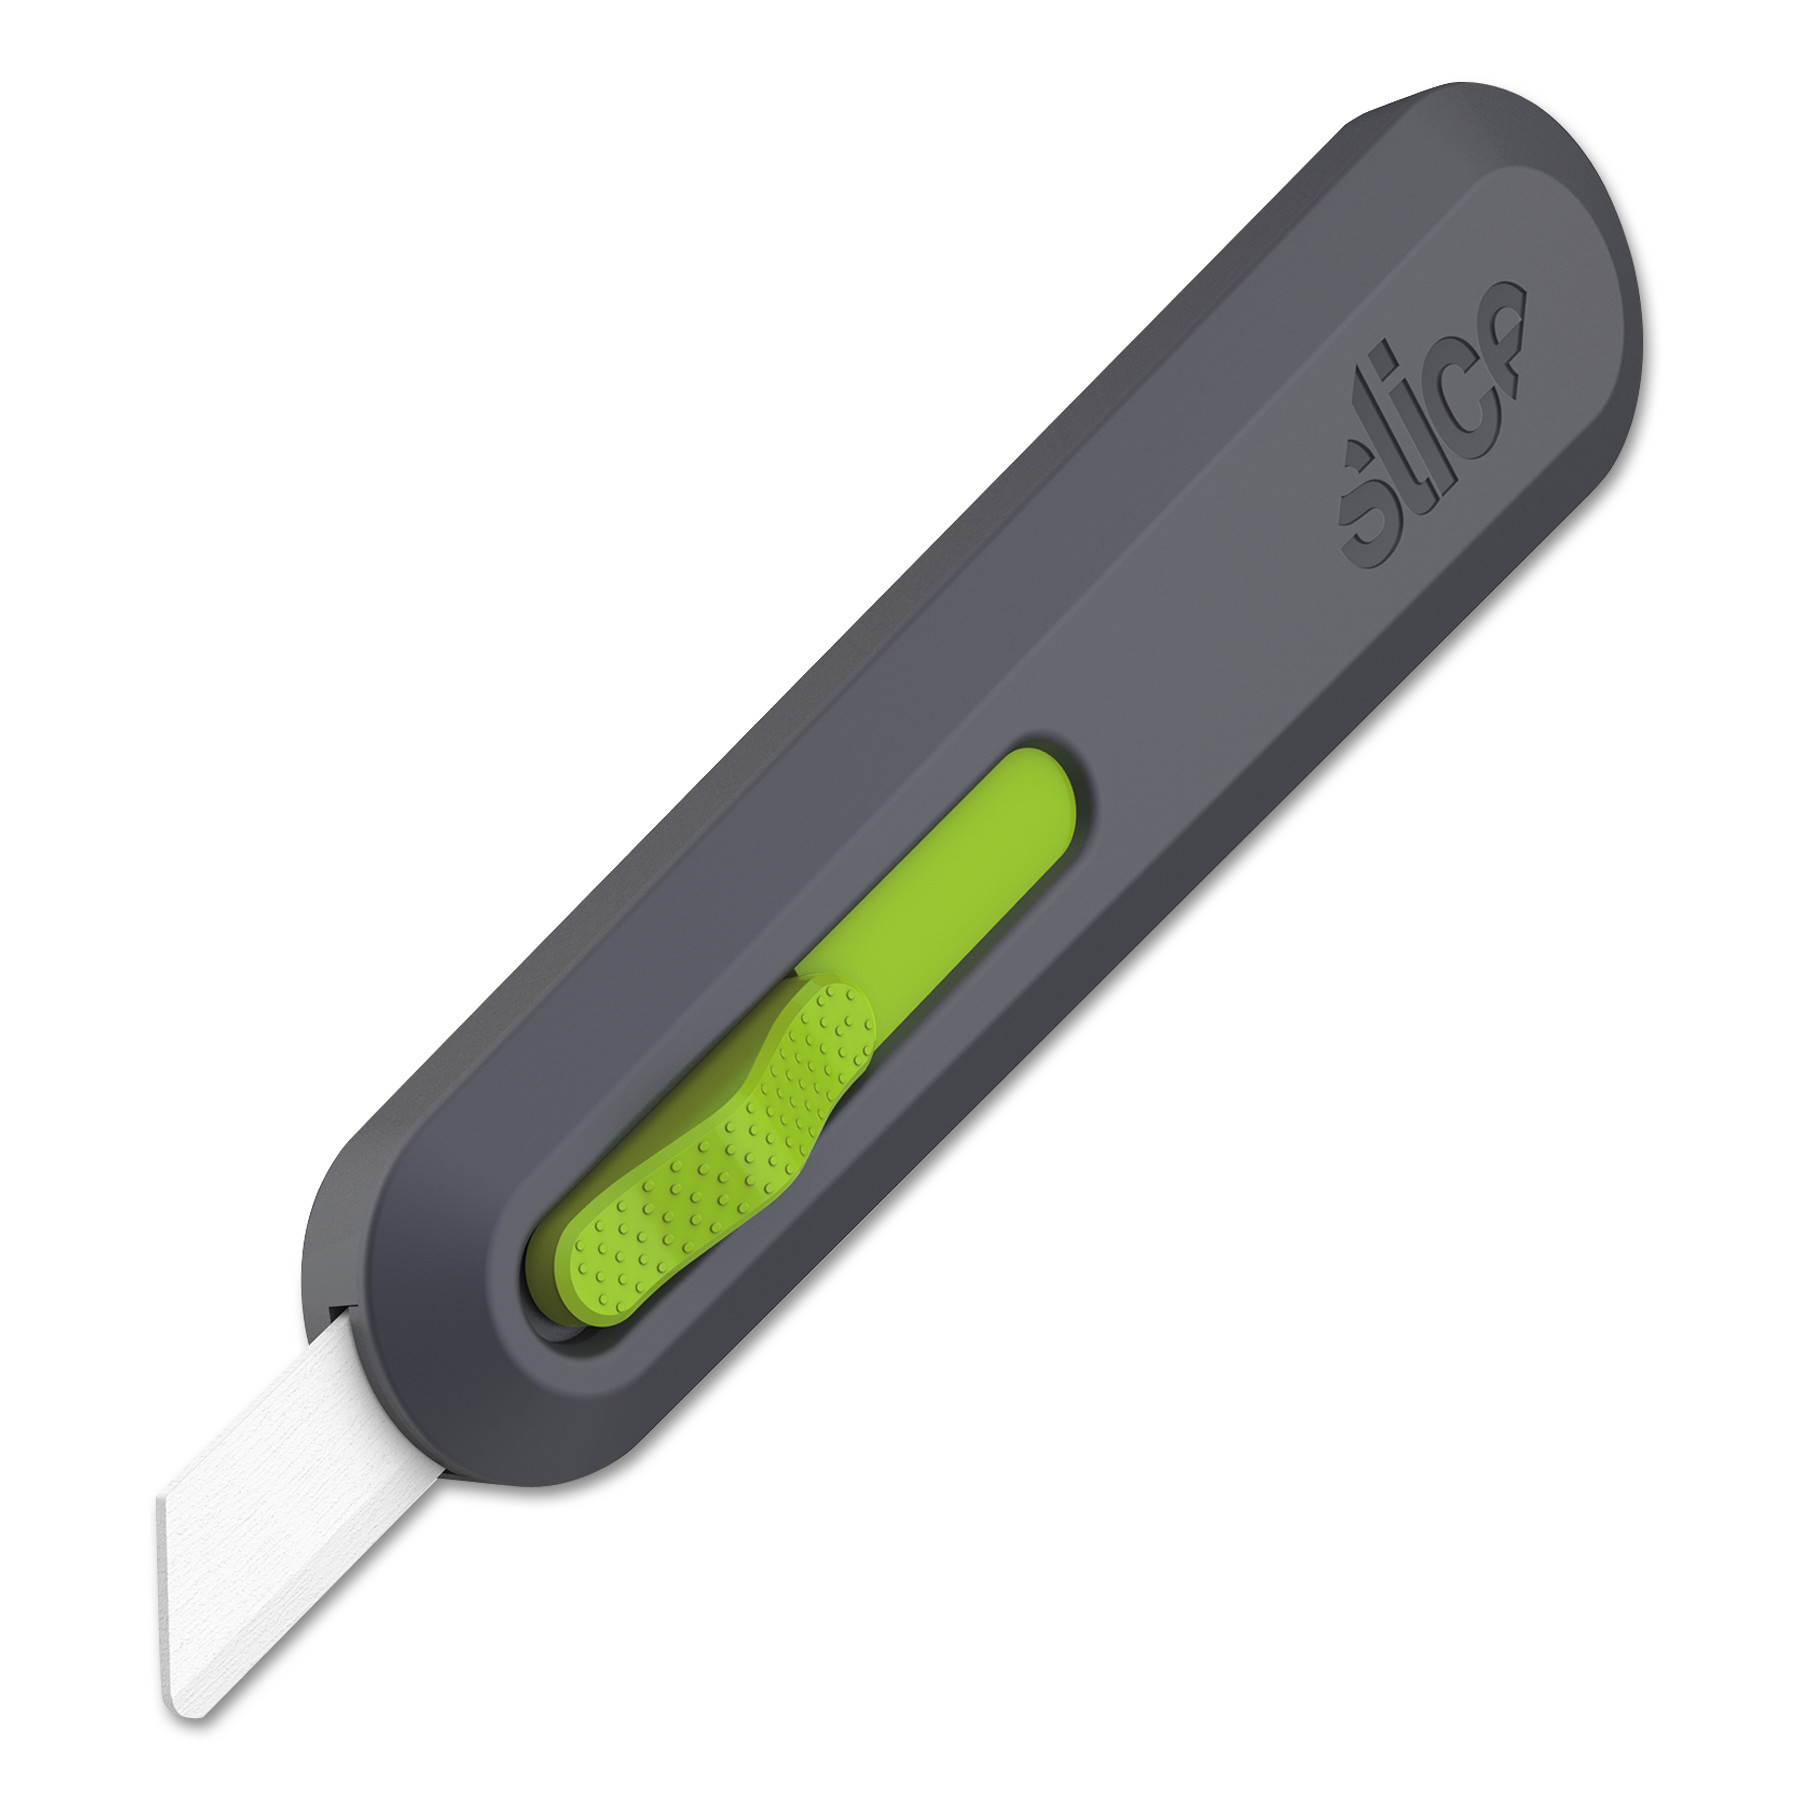  slice 10554 Utility Knives, Double Sided, Replaceable, Stainless Steel, Gray, Green (SLI10554) 